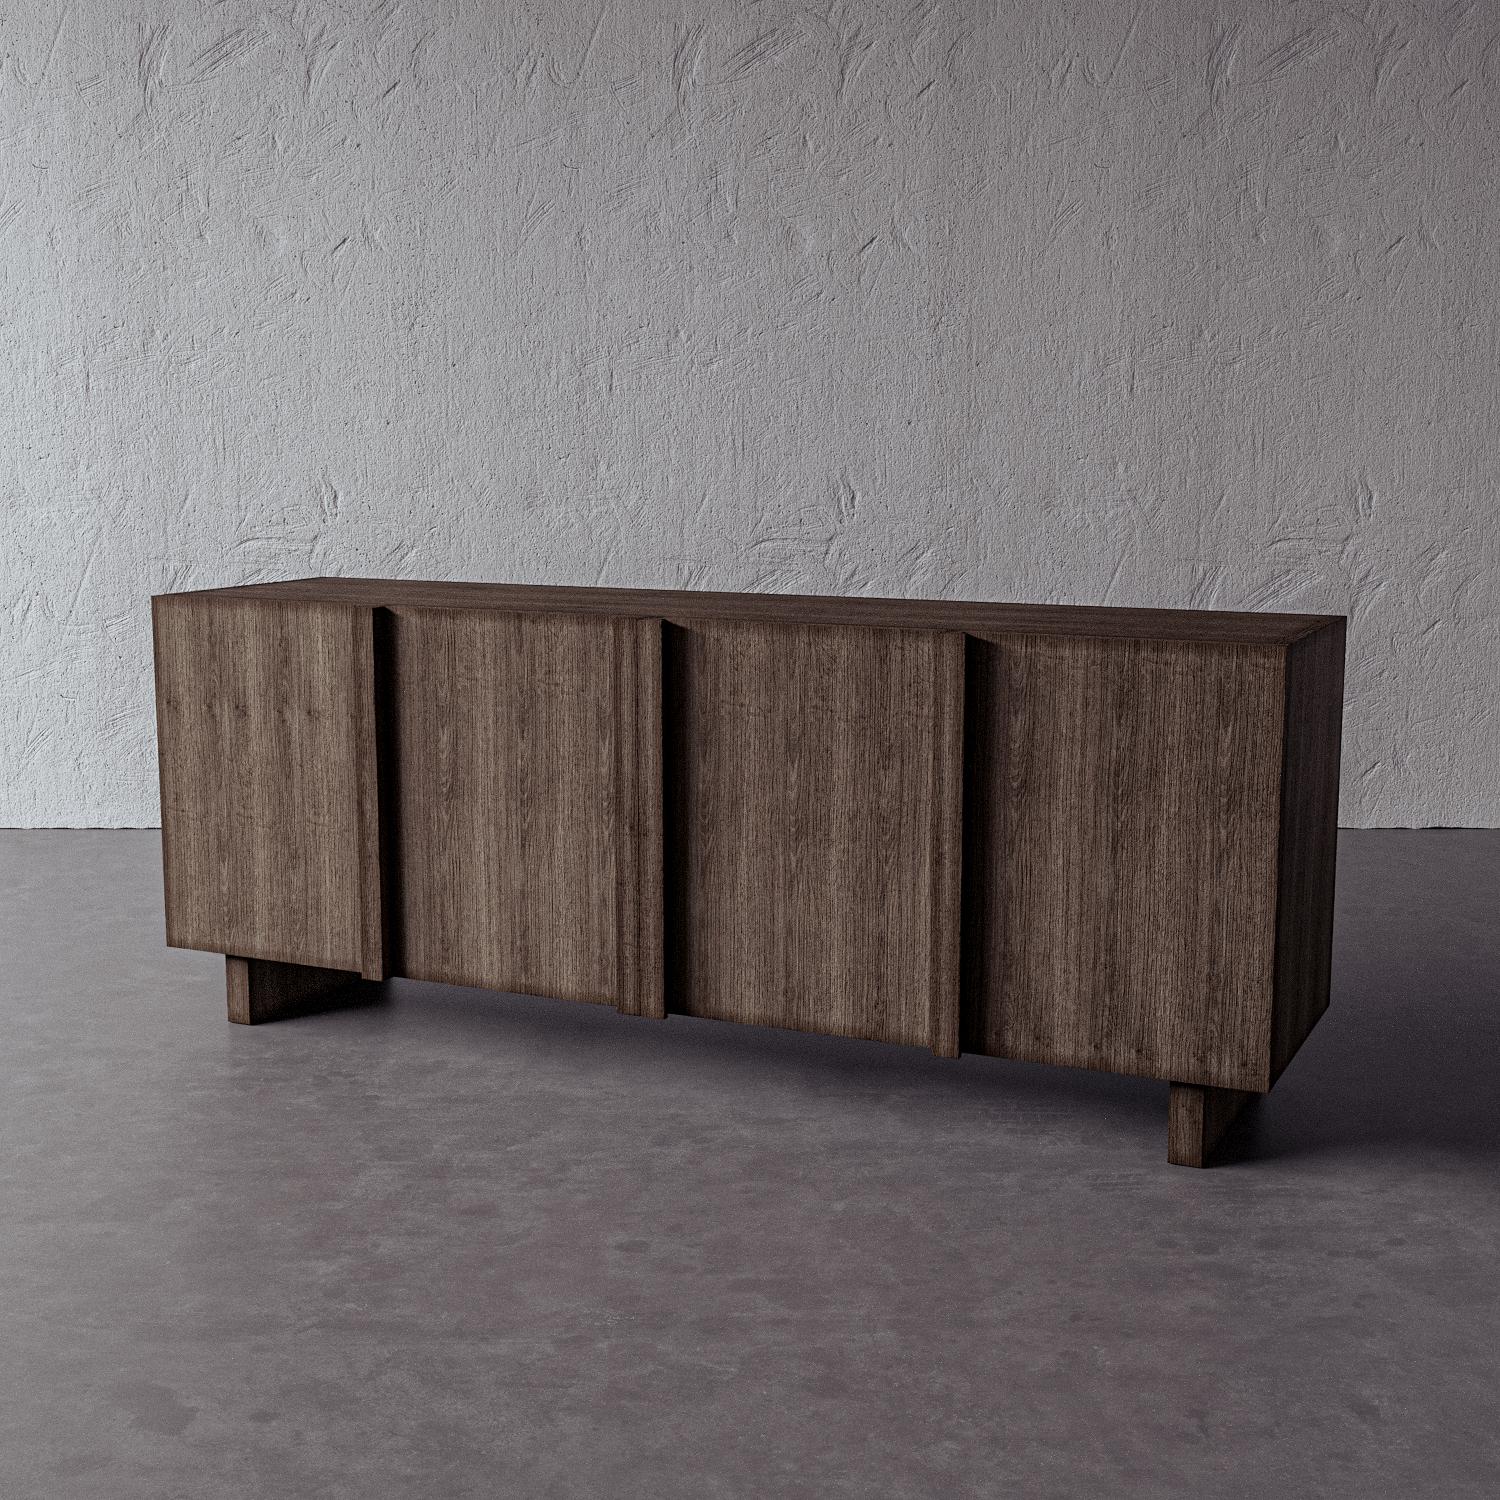 This large modular media cabinet in wood takes cues from Hans Wegner and Charlotte Perriand to make an elegant, architectural storage solution for an artful office, living room, den, and more. Handmade by artisans in Vietnam, this piece is gorgeous